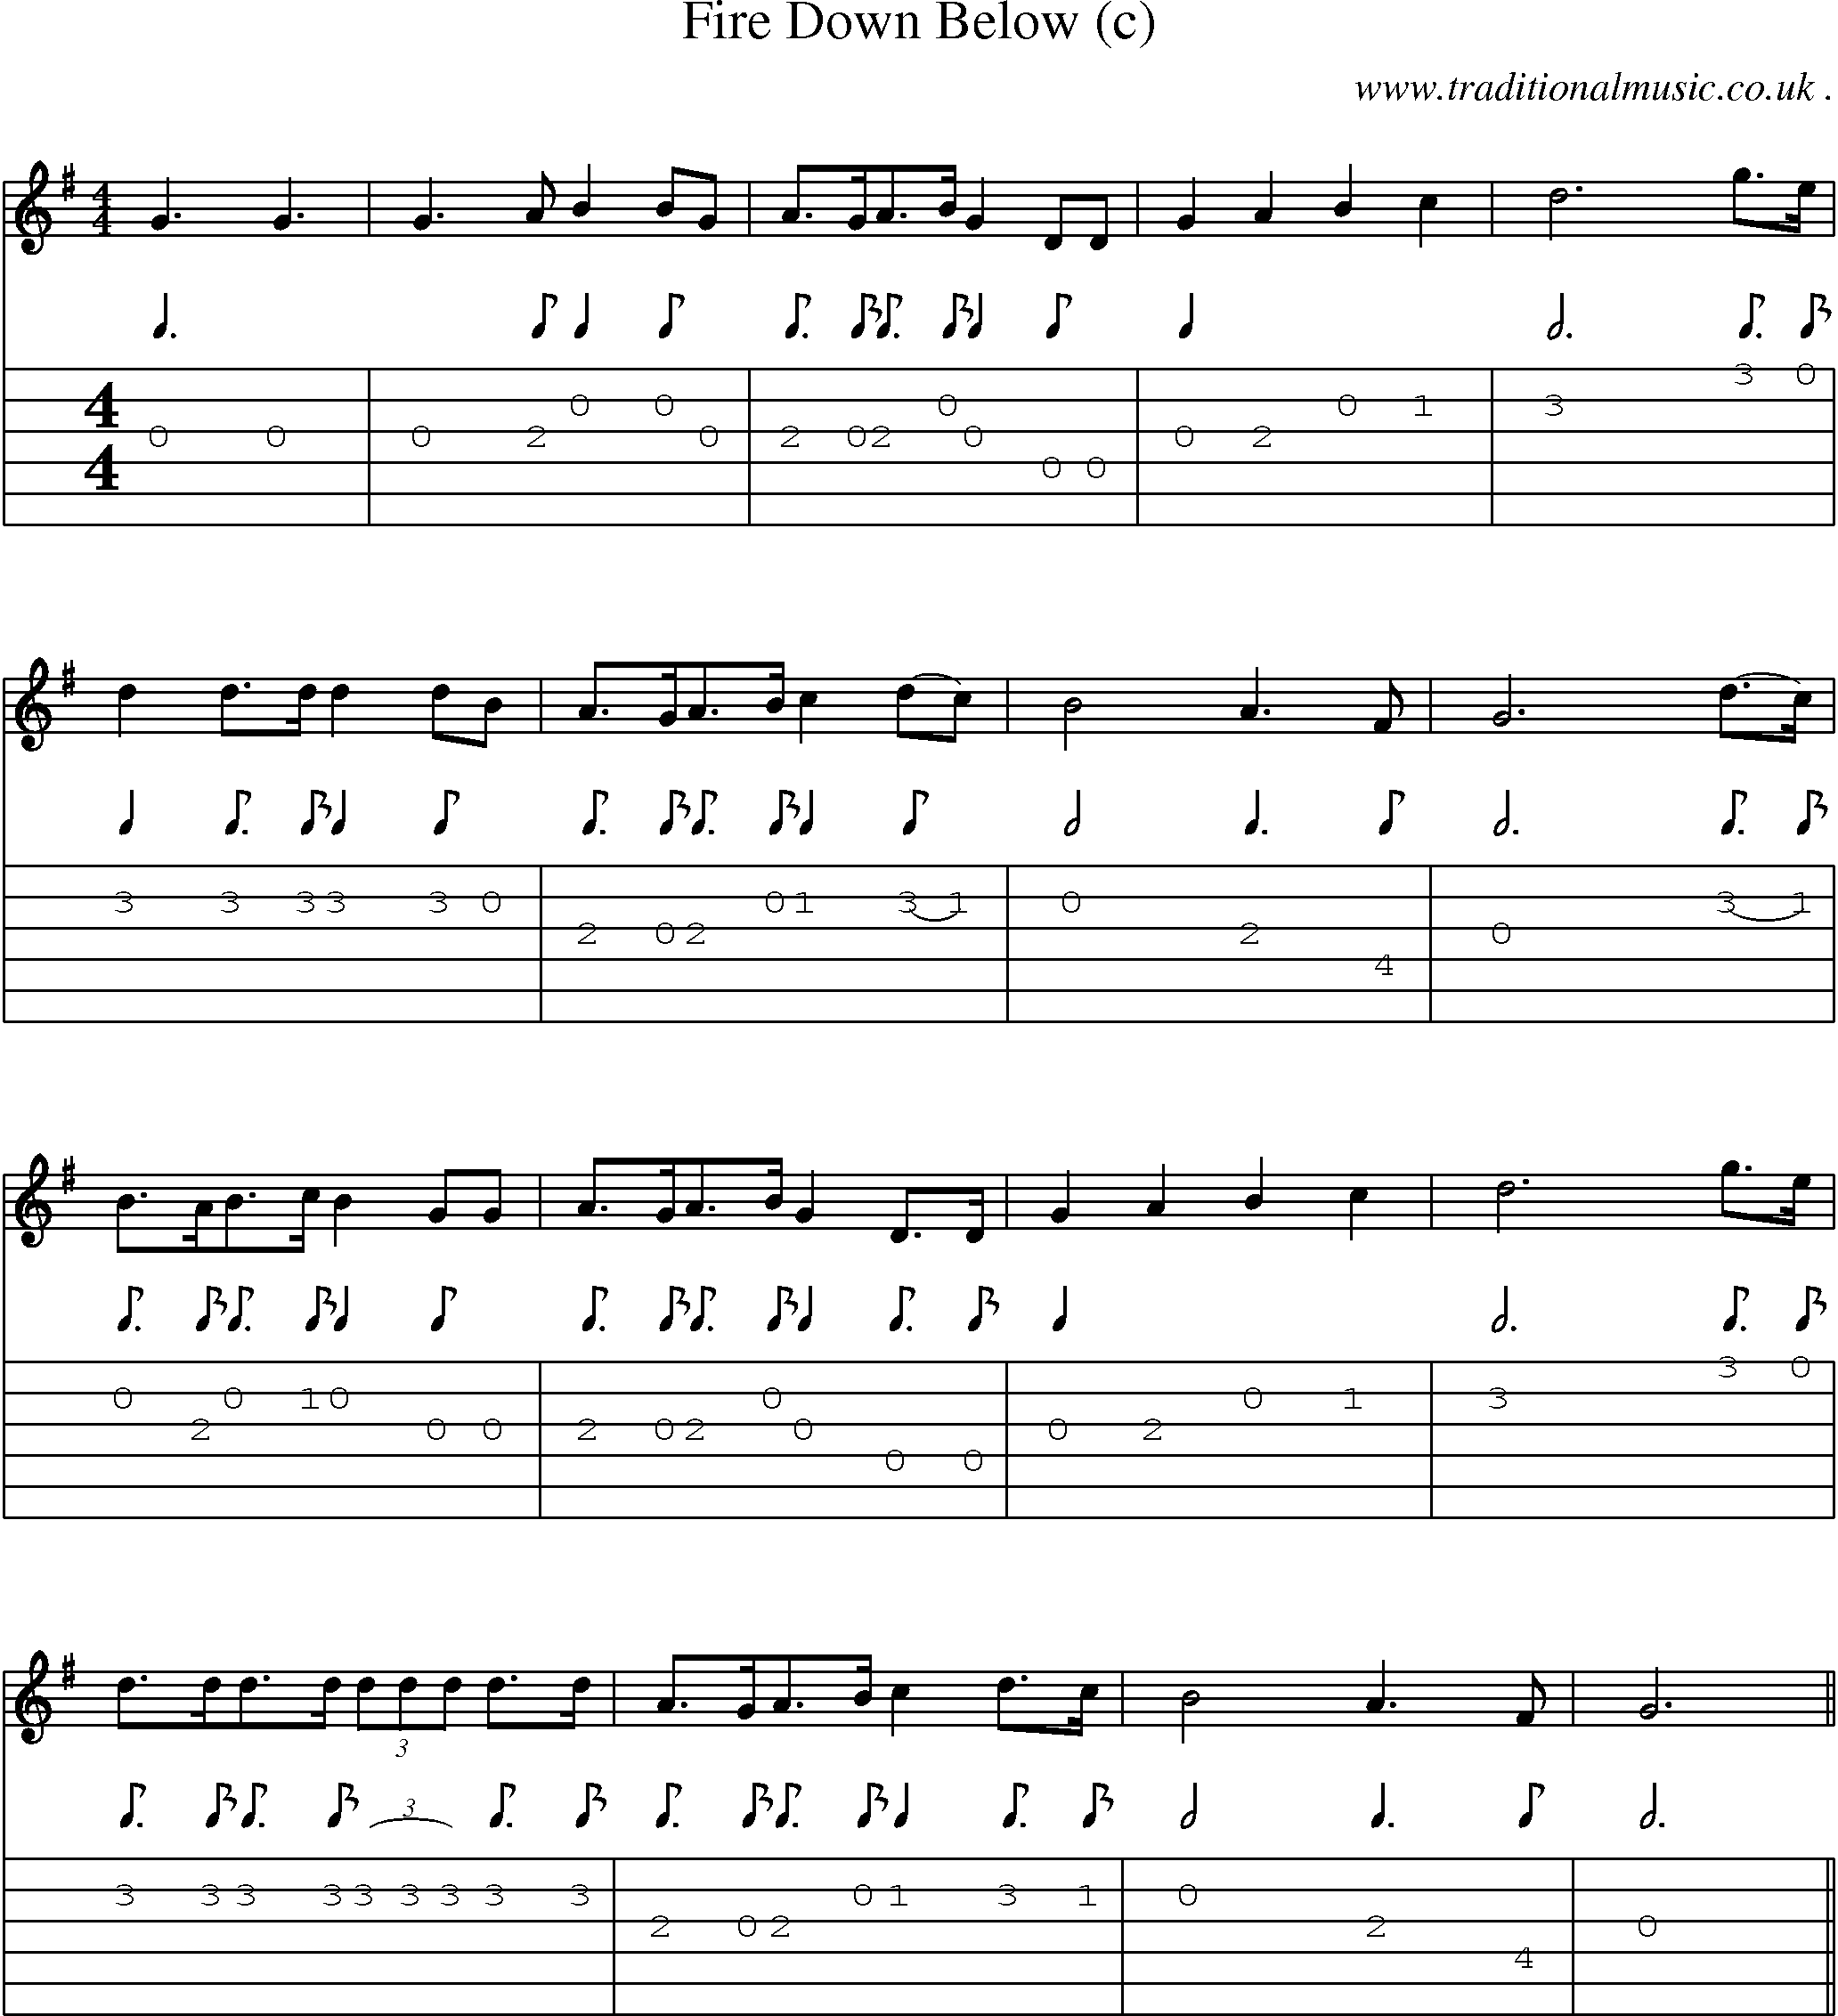 Sheet-Music and Guitar Tabs for Fire Down Below (c)